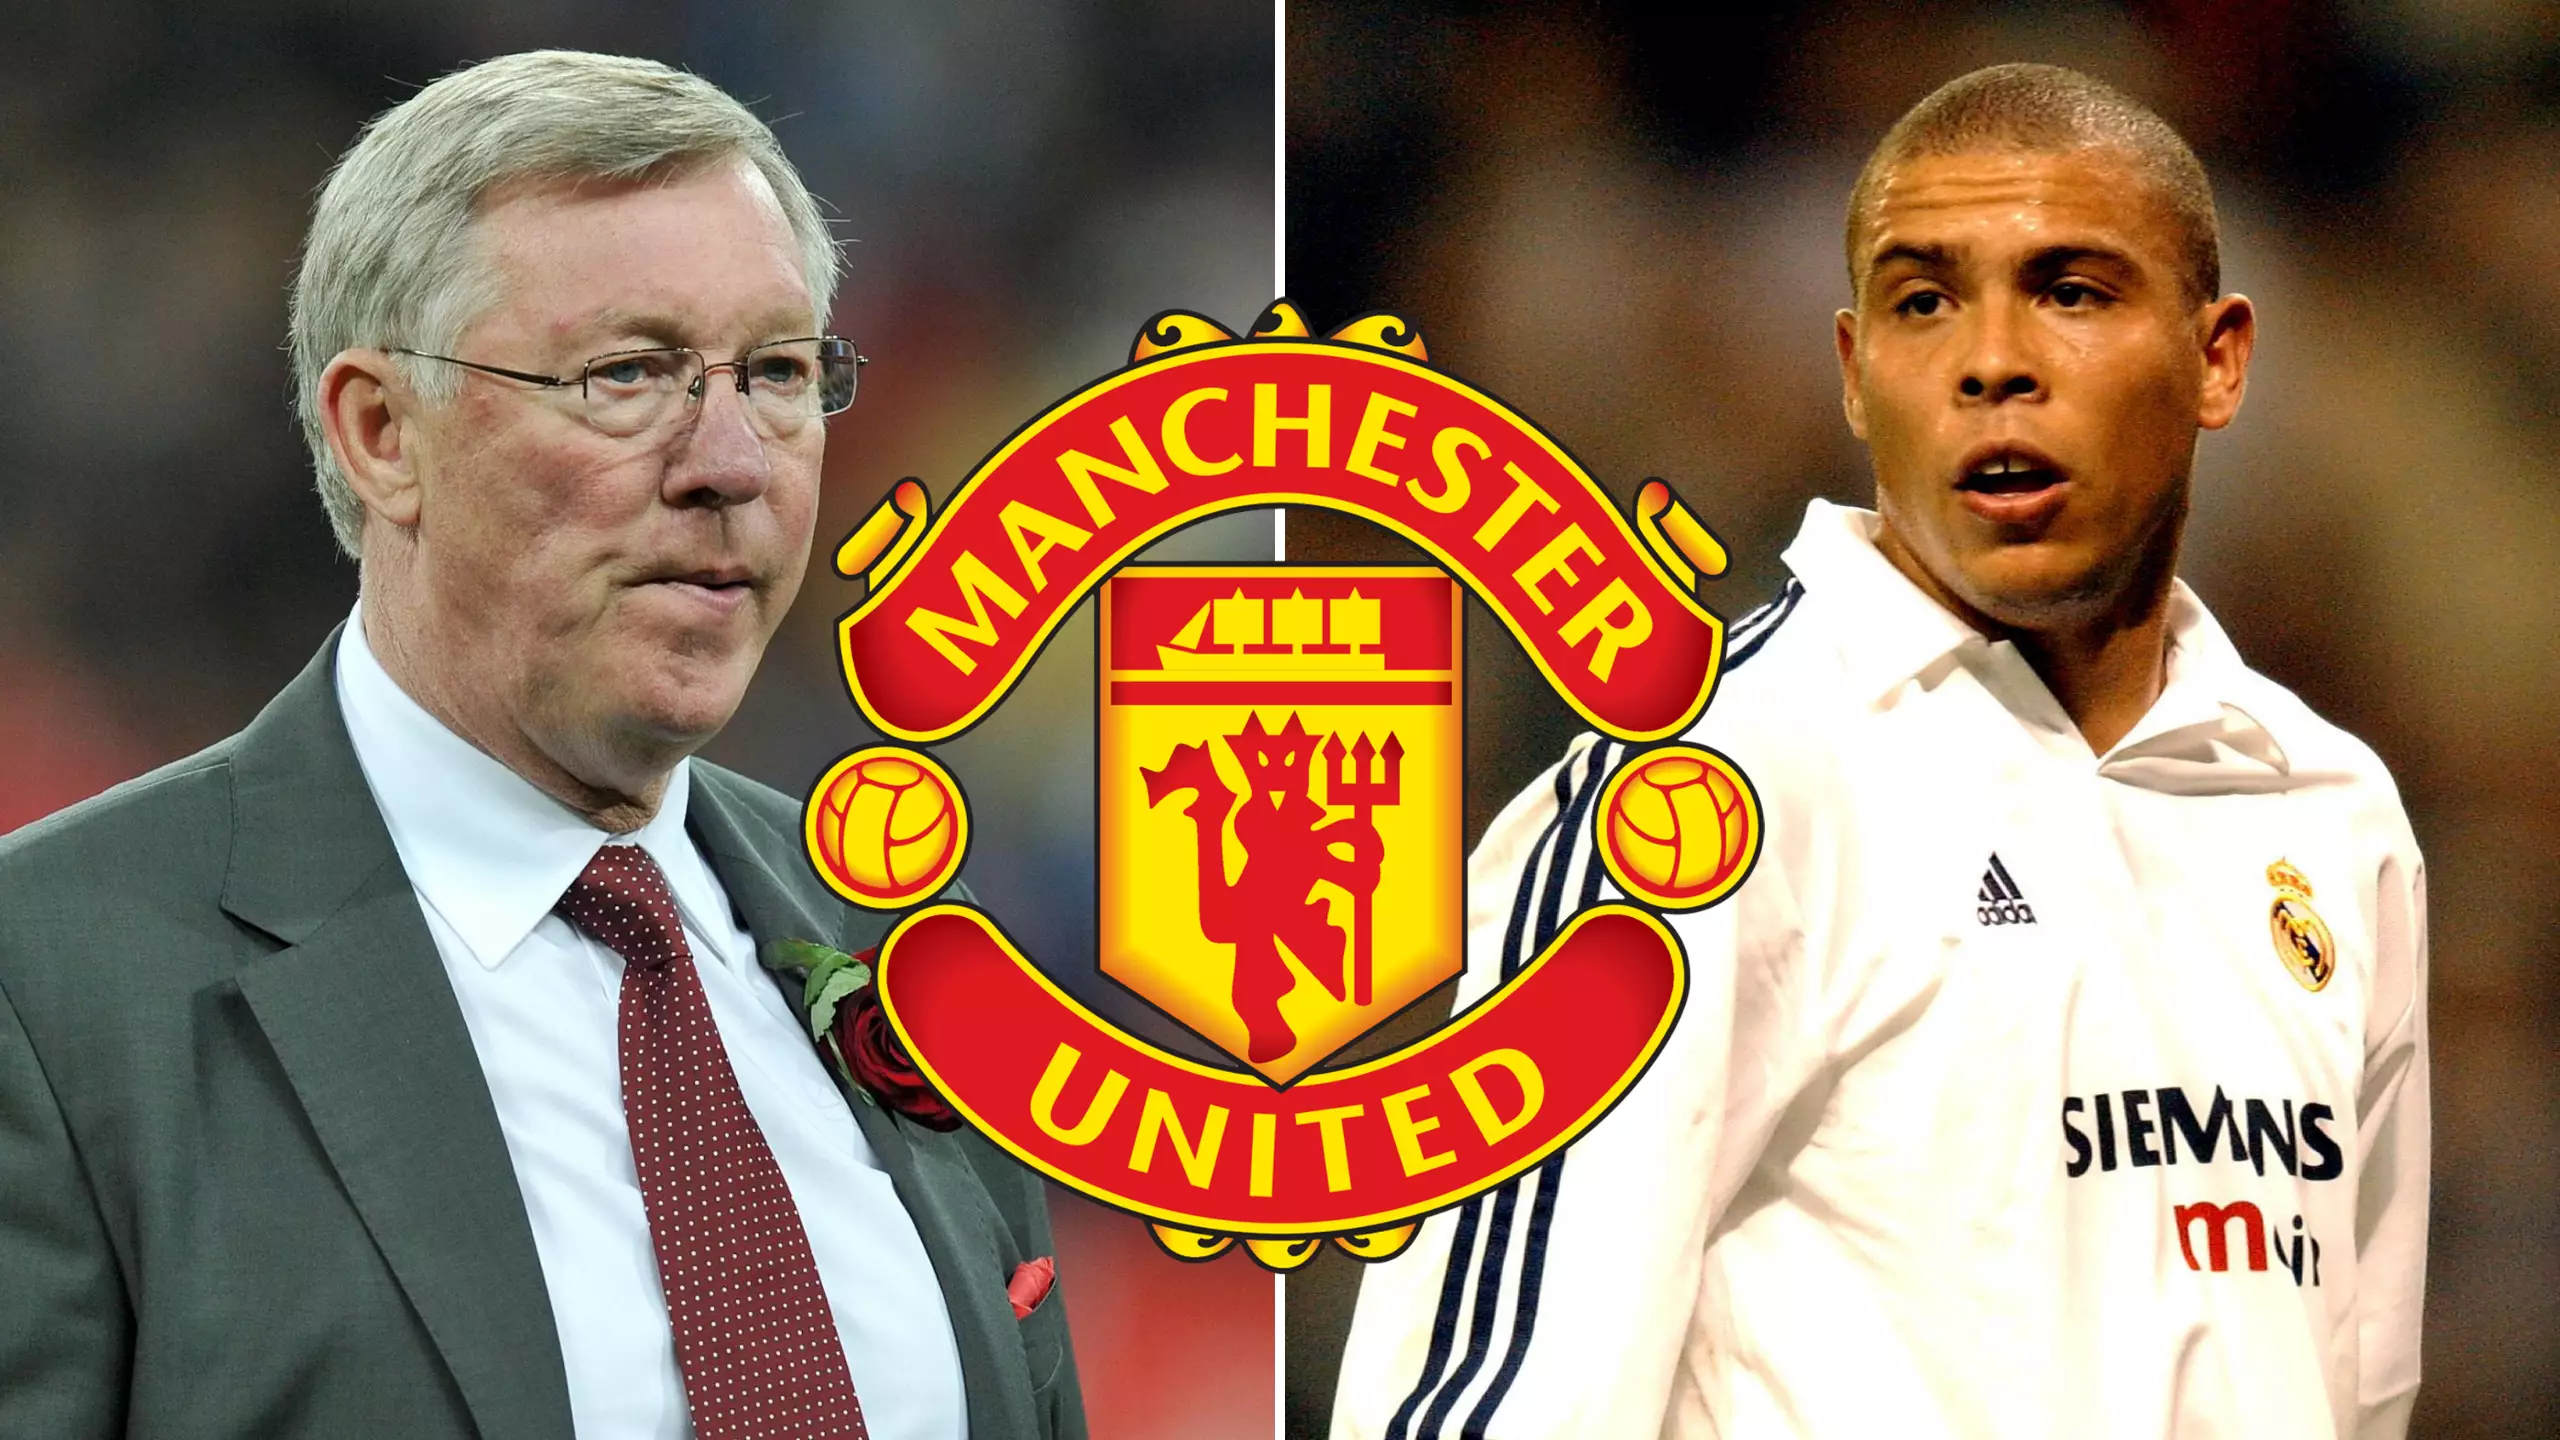 Sir Alex Ferguson Once Turned Down The Chance To Sign Ronaldo For Manchester United